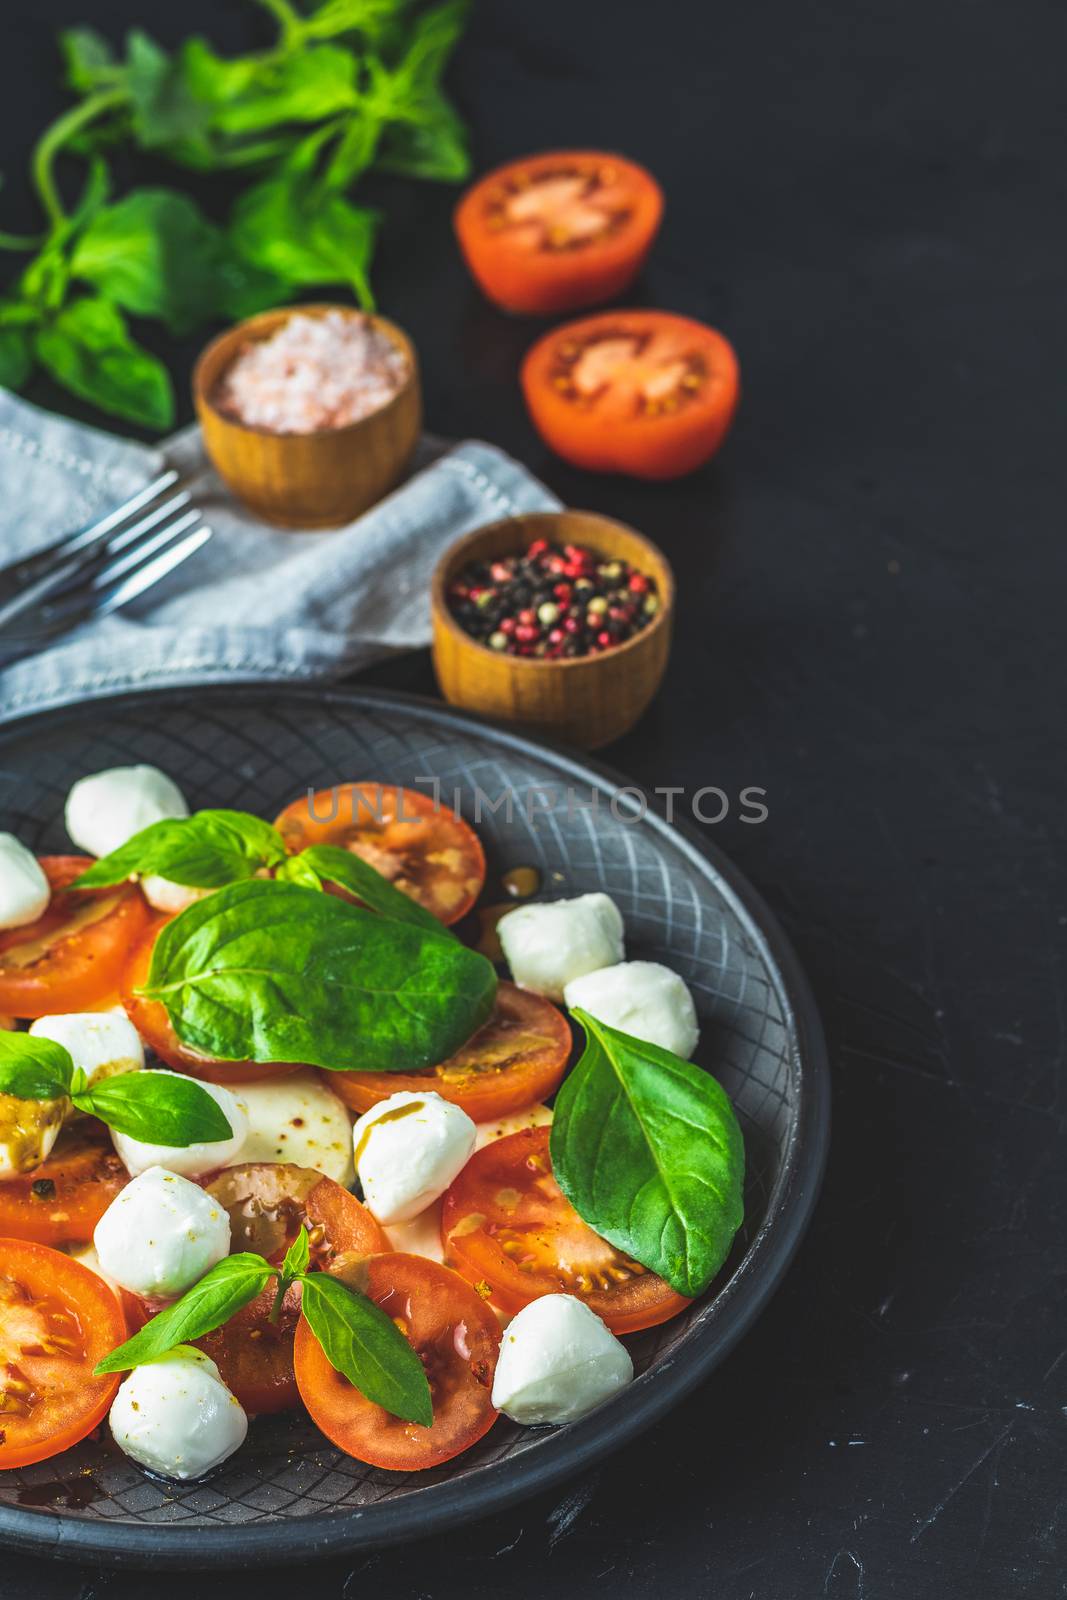 Italian caprese salad with sliced tomatoes, mozzarella cheese, basil and olive oil served in black ceramic plate with fork and knife on textile napkin over dark concrete table surface with copy space.